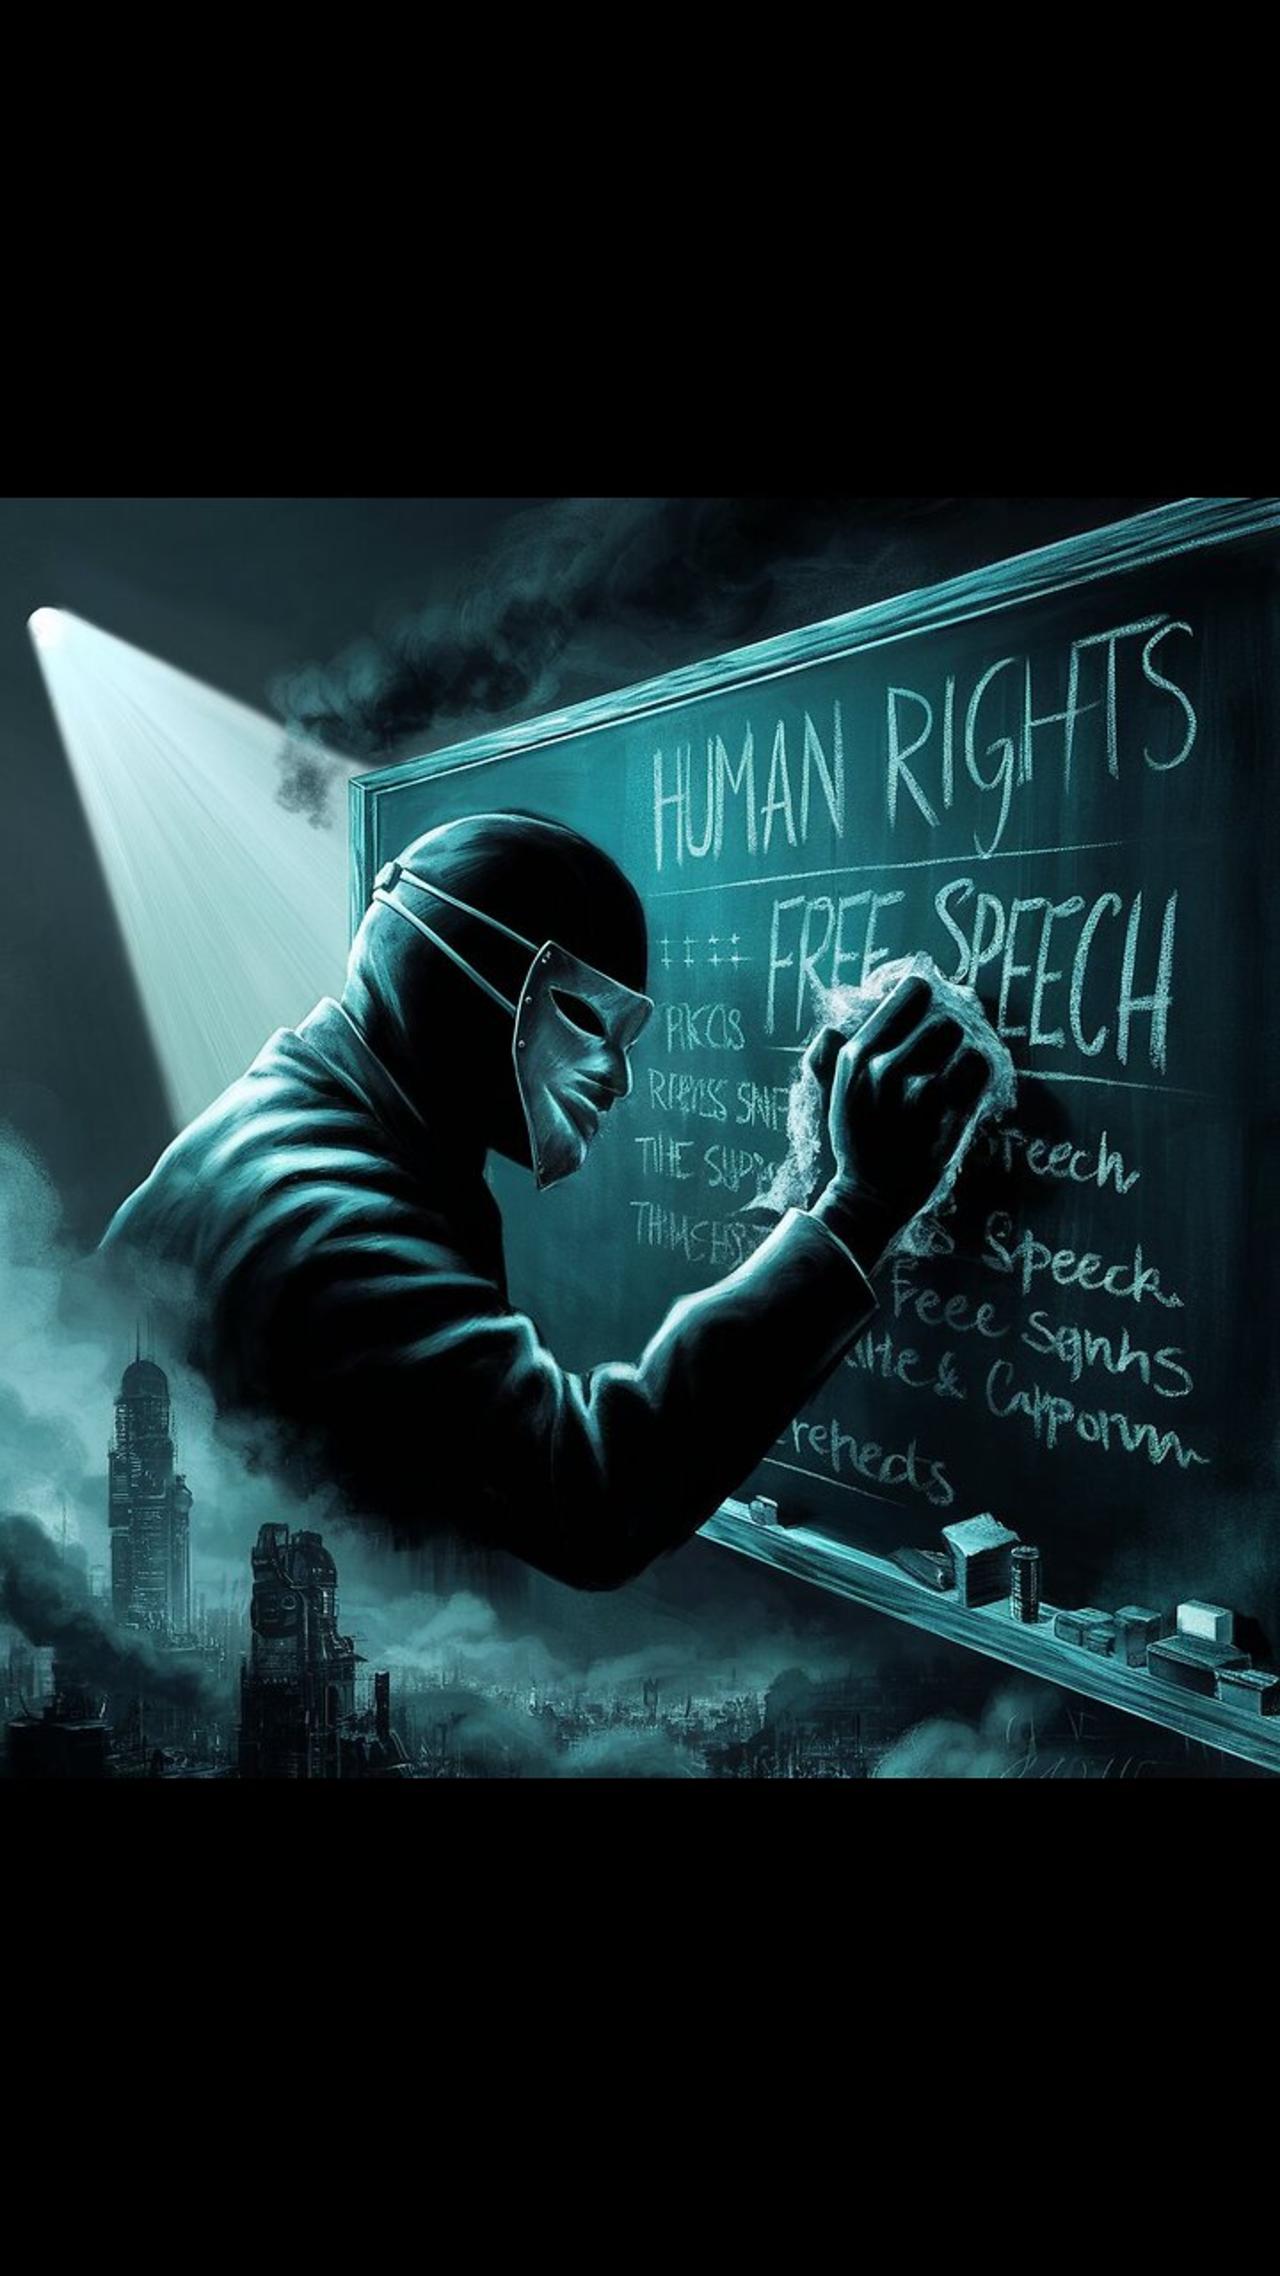 W.H.O REMOVING HUMAN RIGHTS AND FREEDOM OF SPEECH